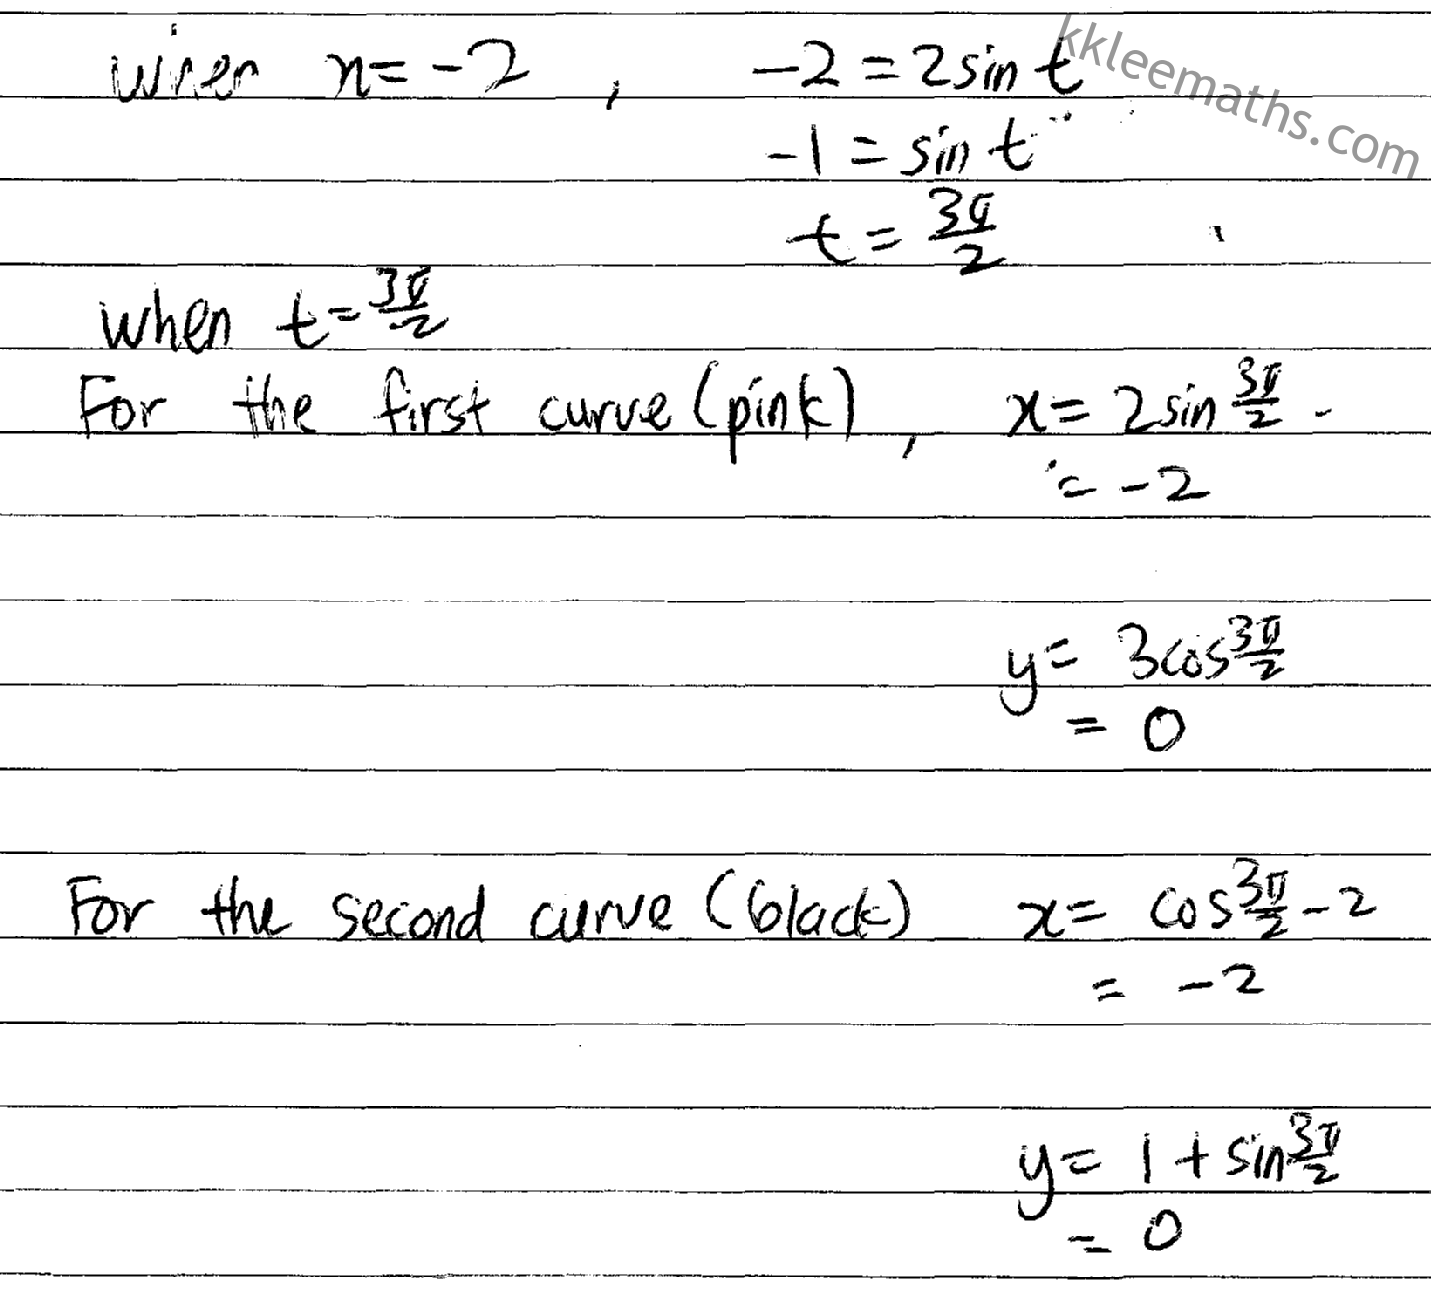 Question 3c Checking